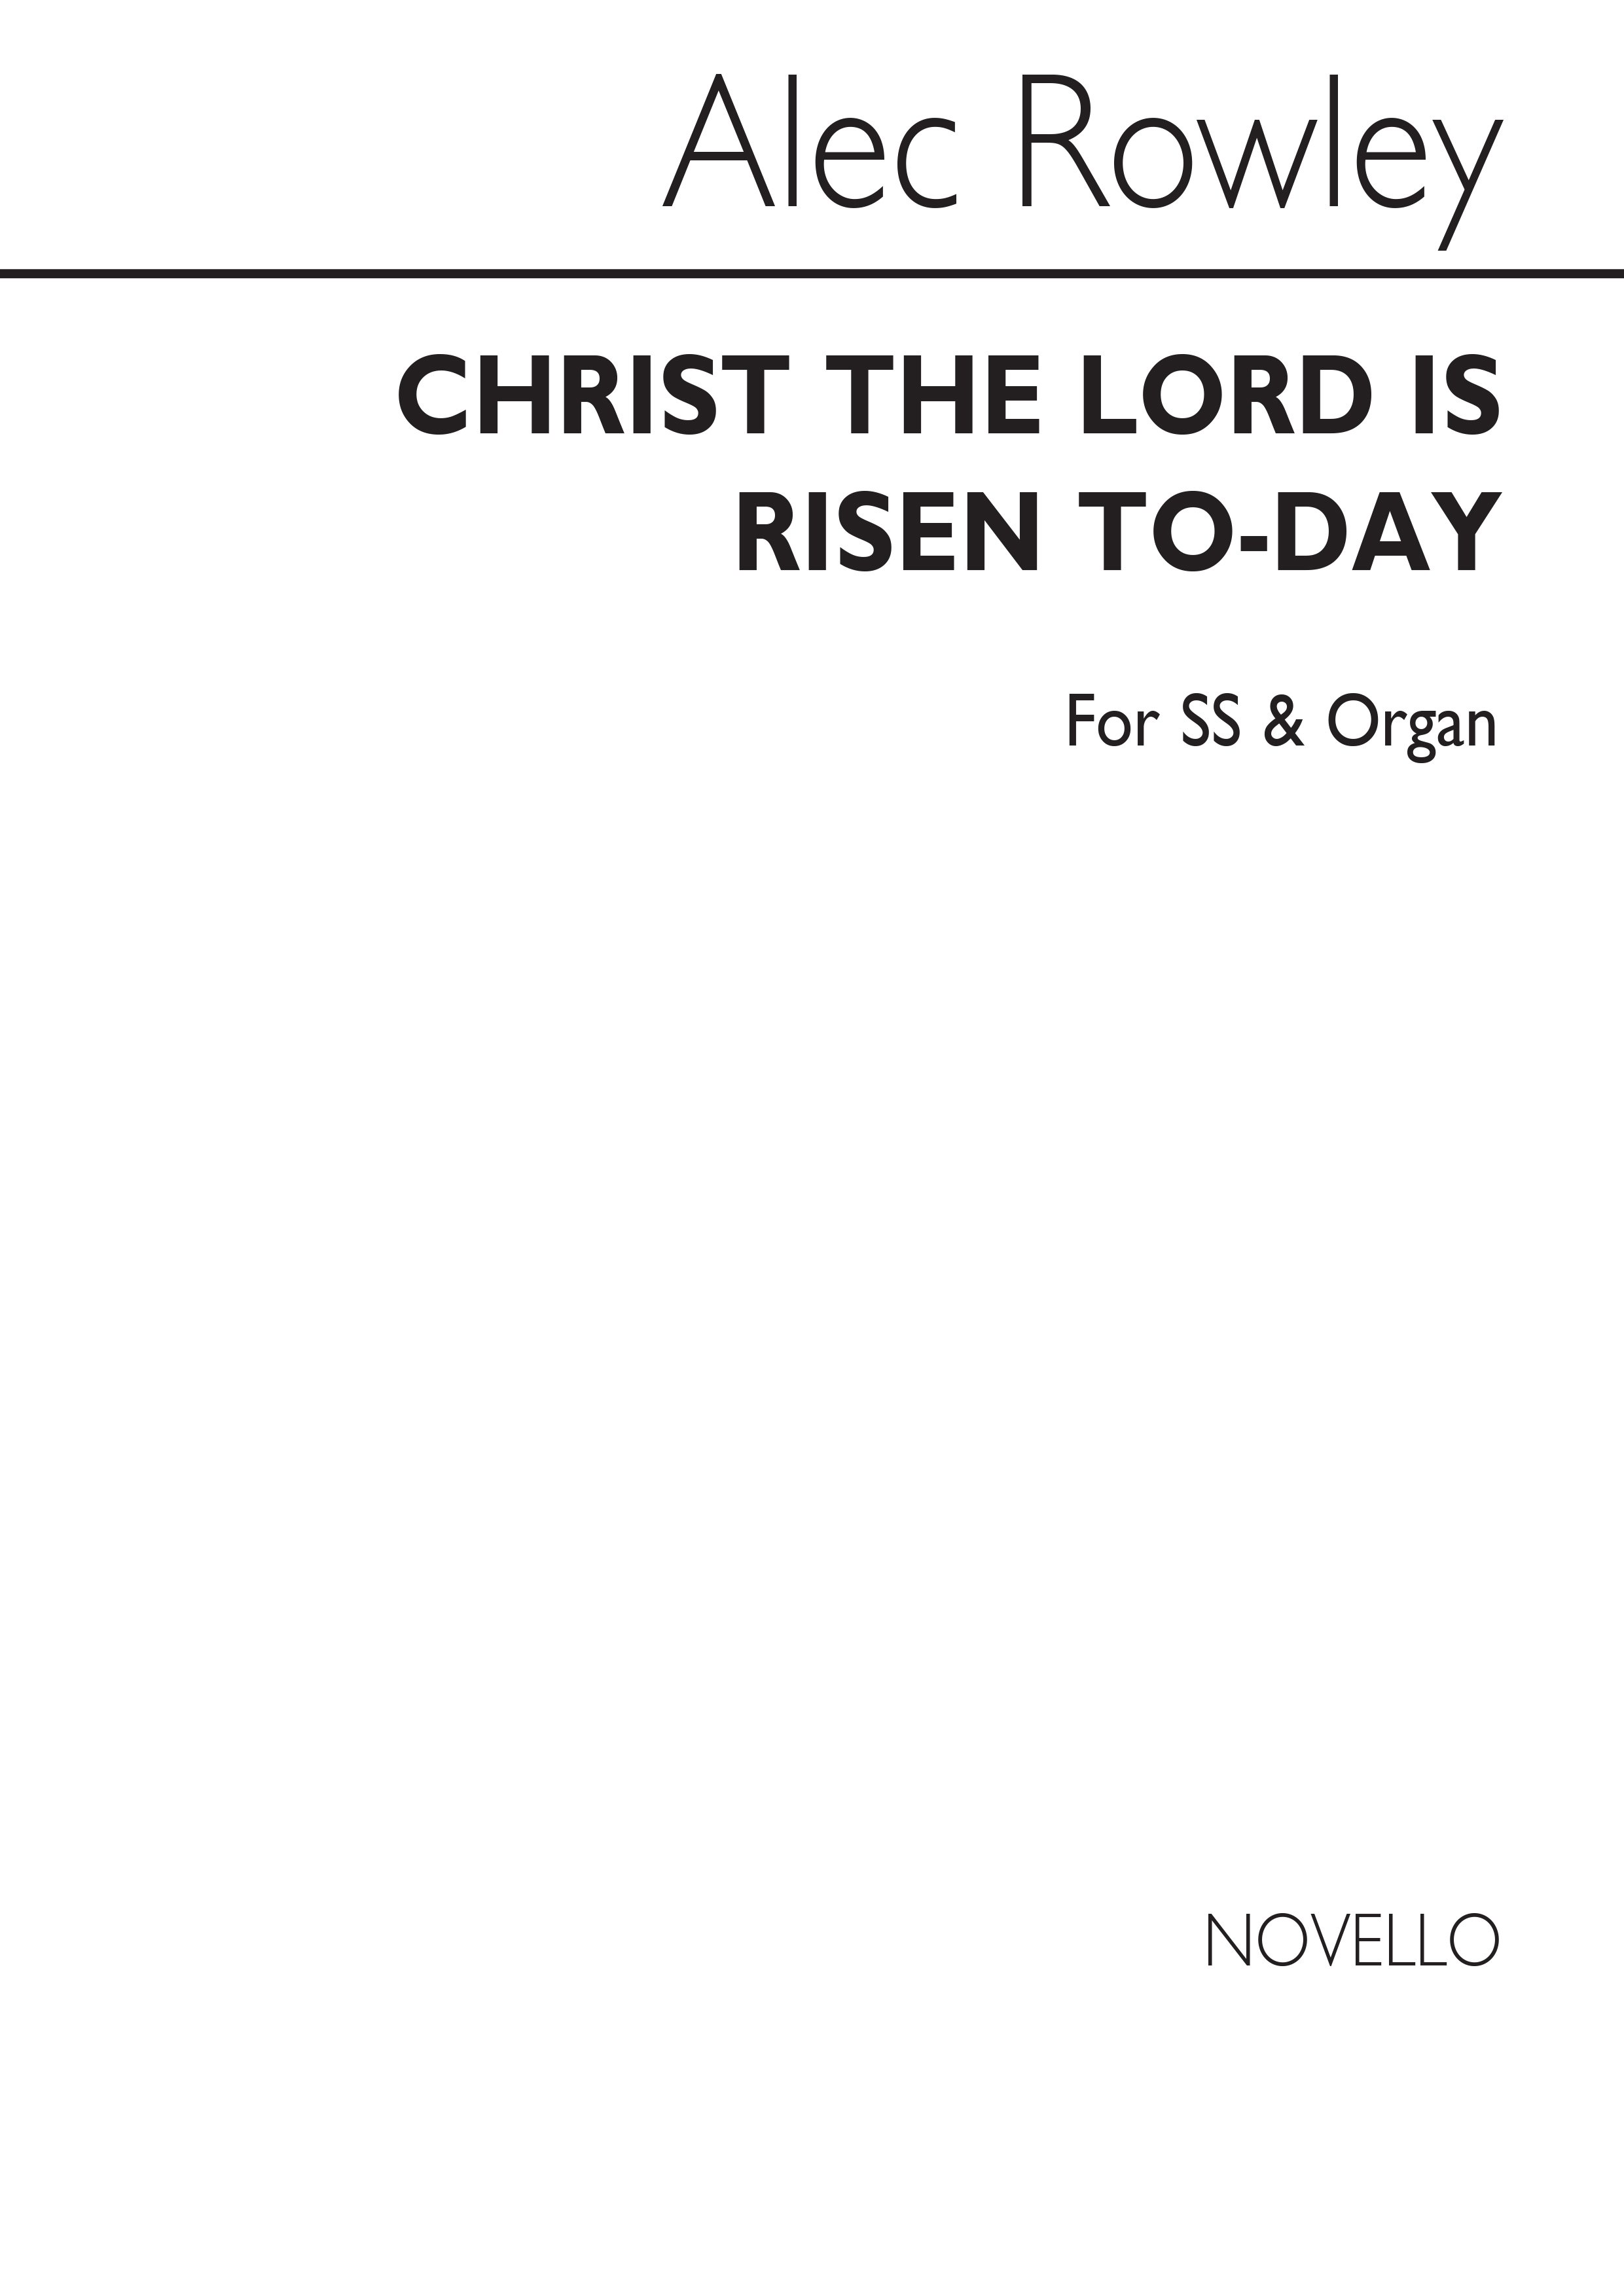 Rowley: Christ The Lord Is Risen Today